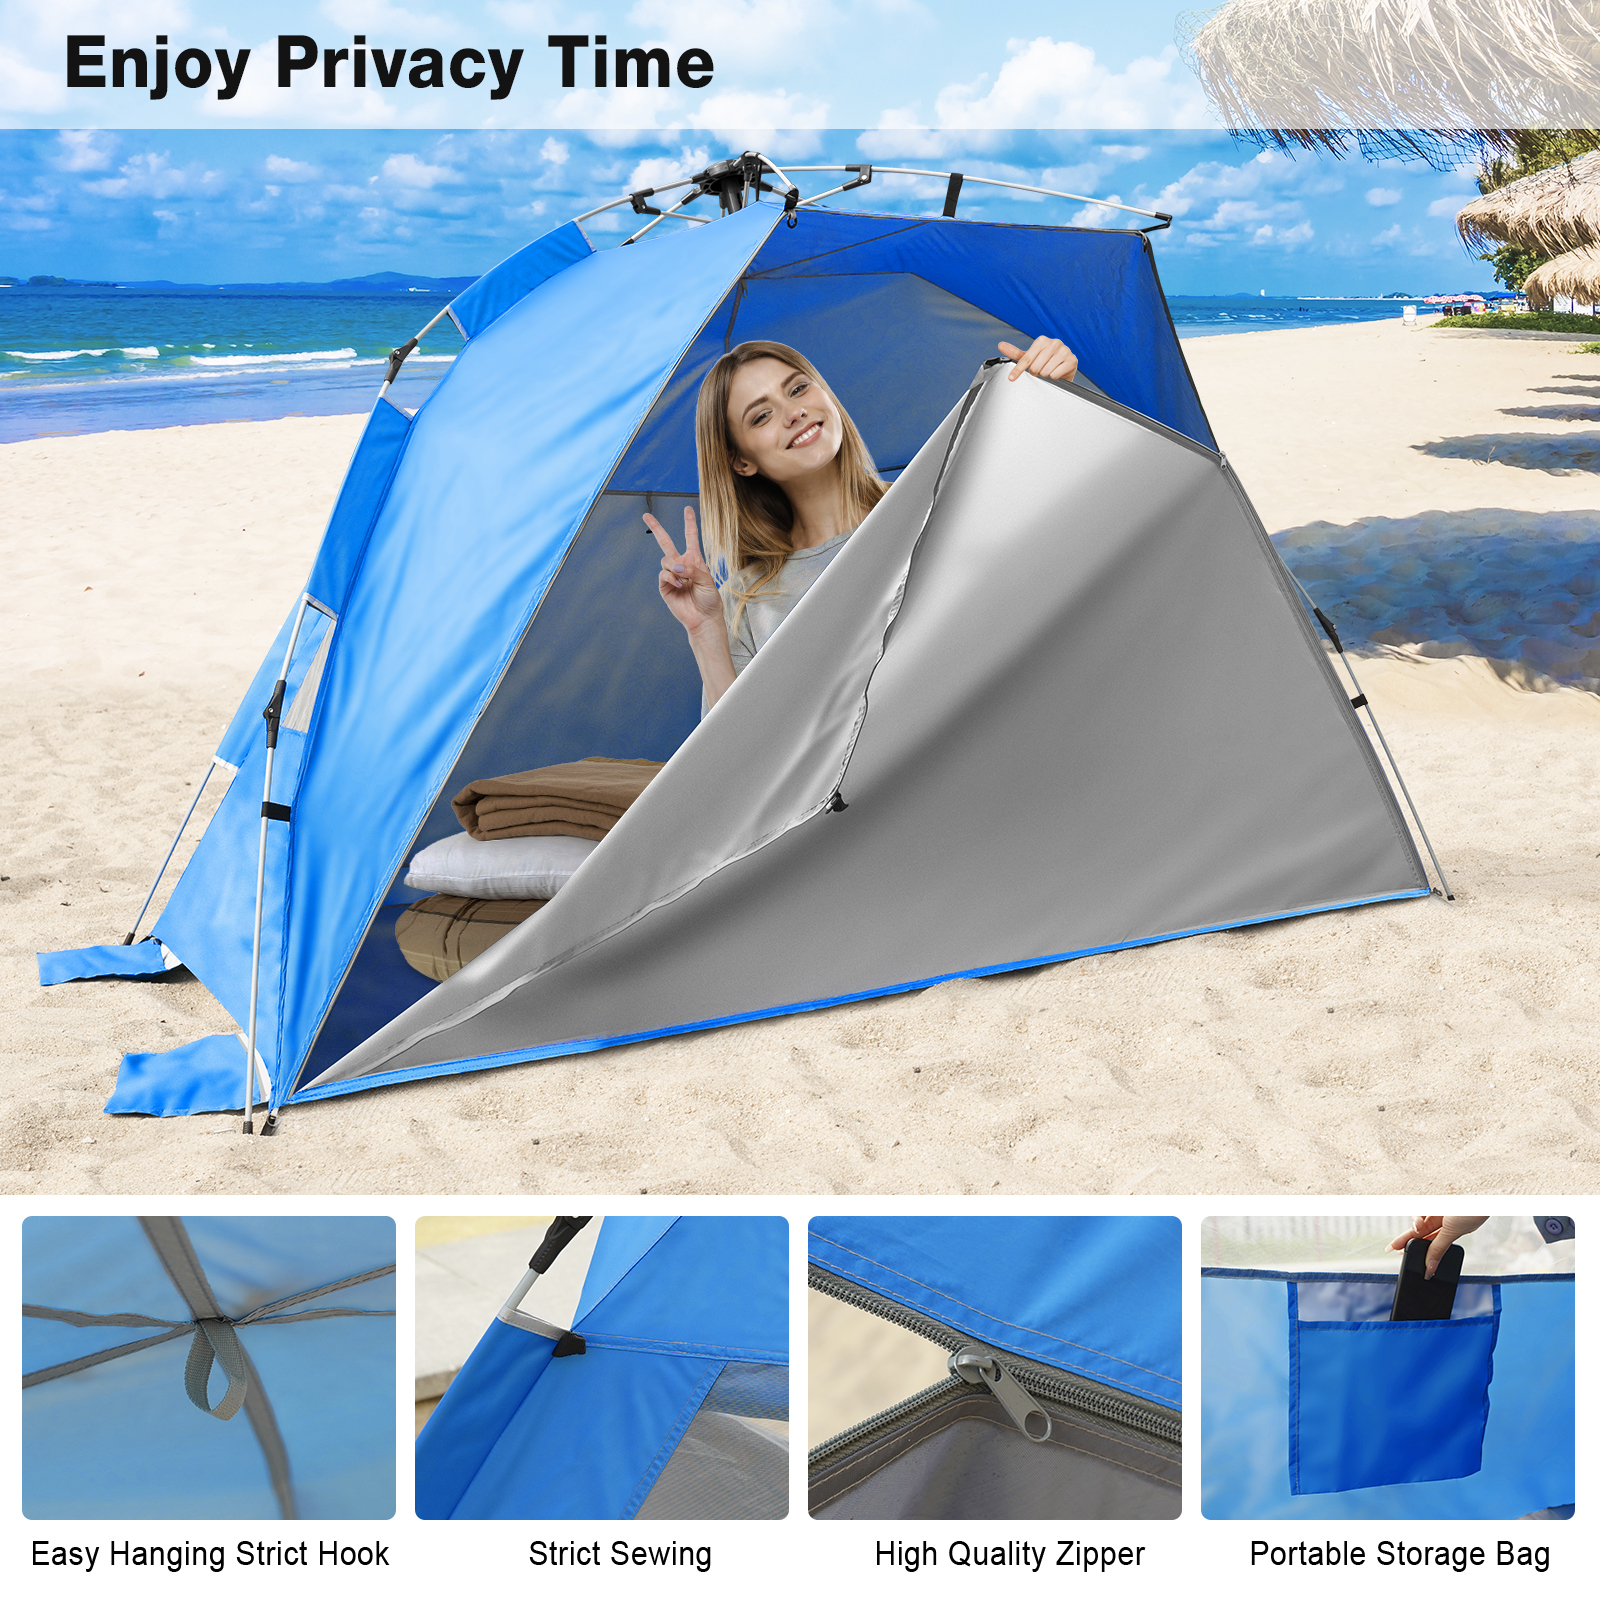 SUNOYAR Beach Tent, 4-6 Person Pop-up Beach Tent Sun Shelter, UPF 50+ UV Protection Portable Waterproof Beach Tent, Sunshade with Extendable Floor for Family, Fishing, Camping, Blue - image 2 of 8